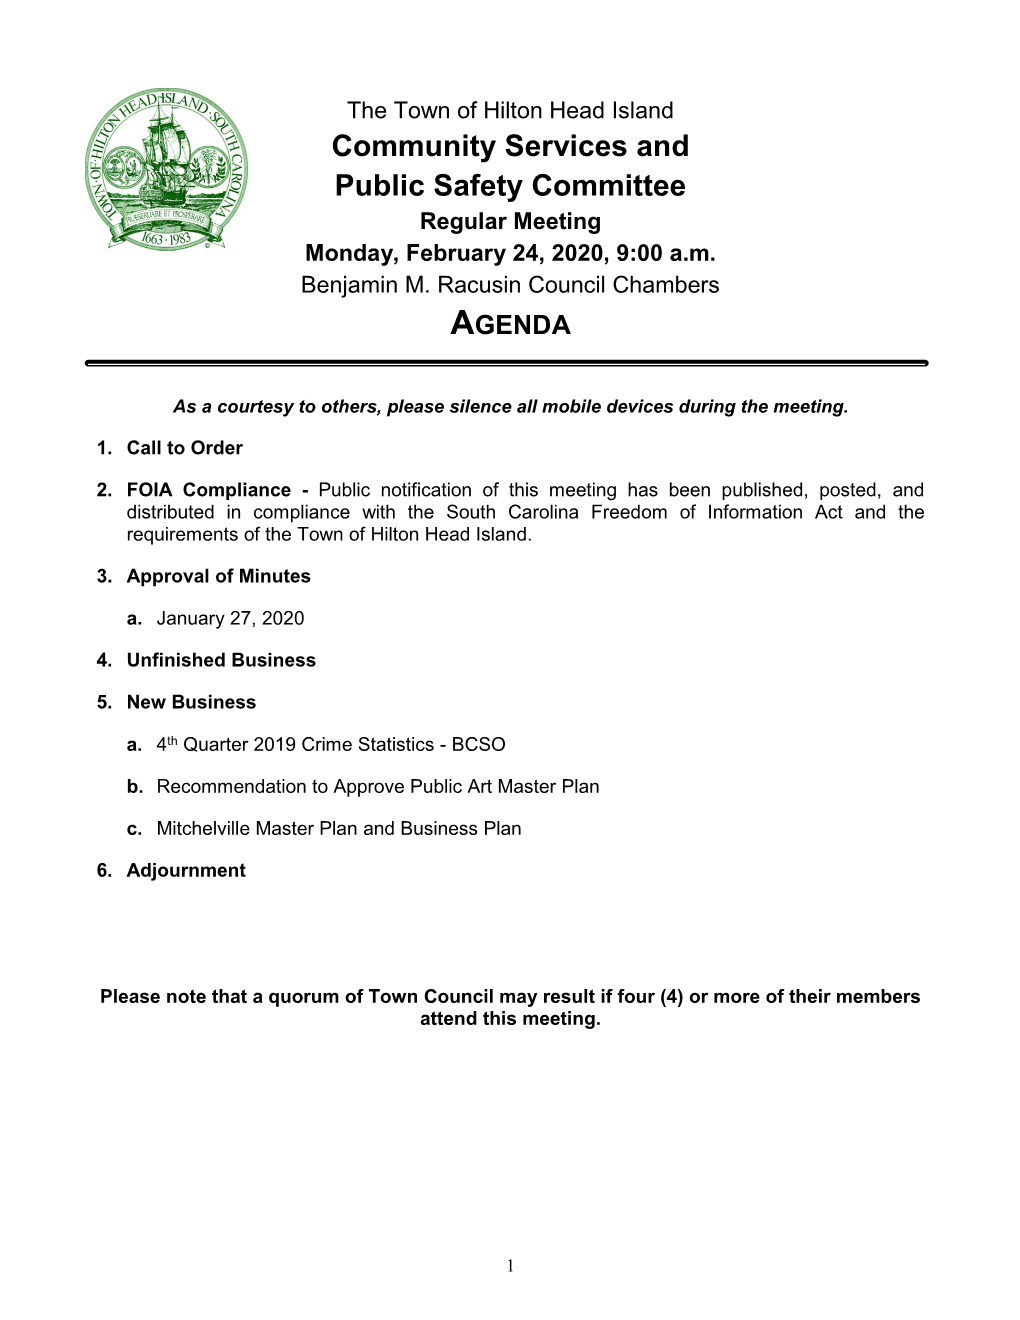 Community Services and Public Safety Committee Regular Meeting Monday, February 24, 2020, 9:00 A.M